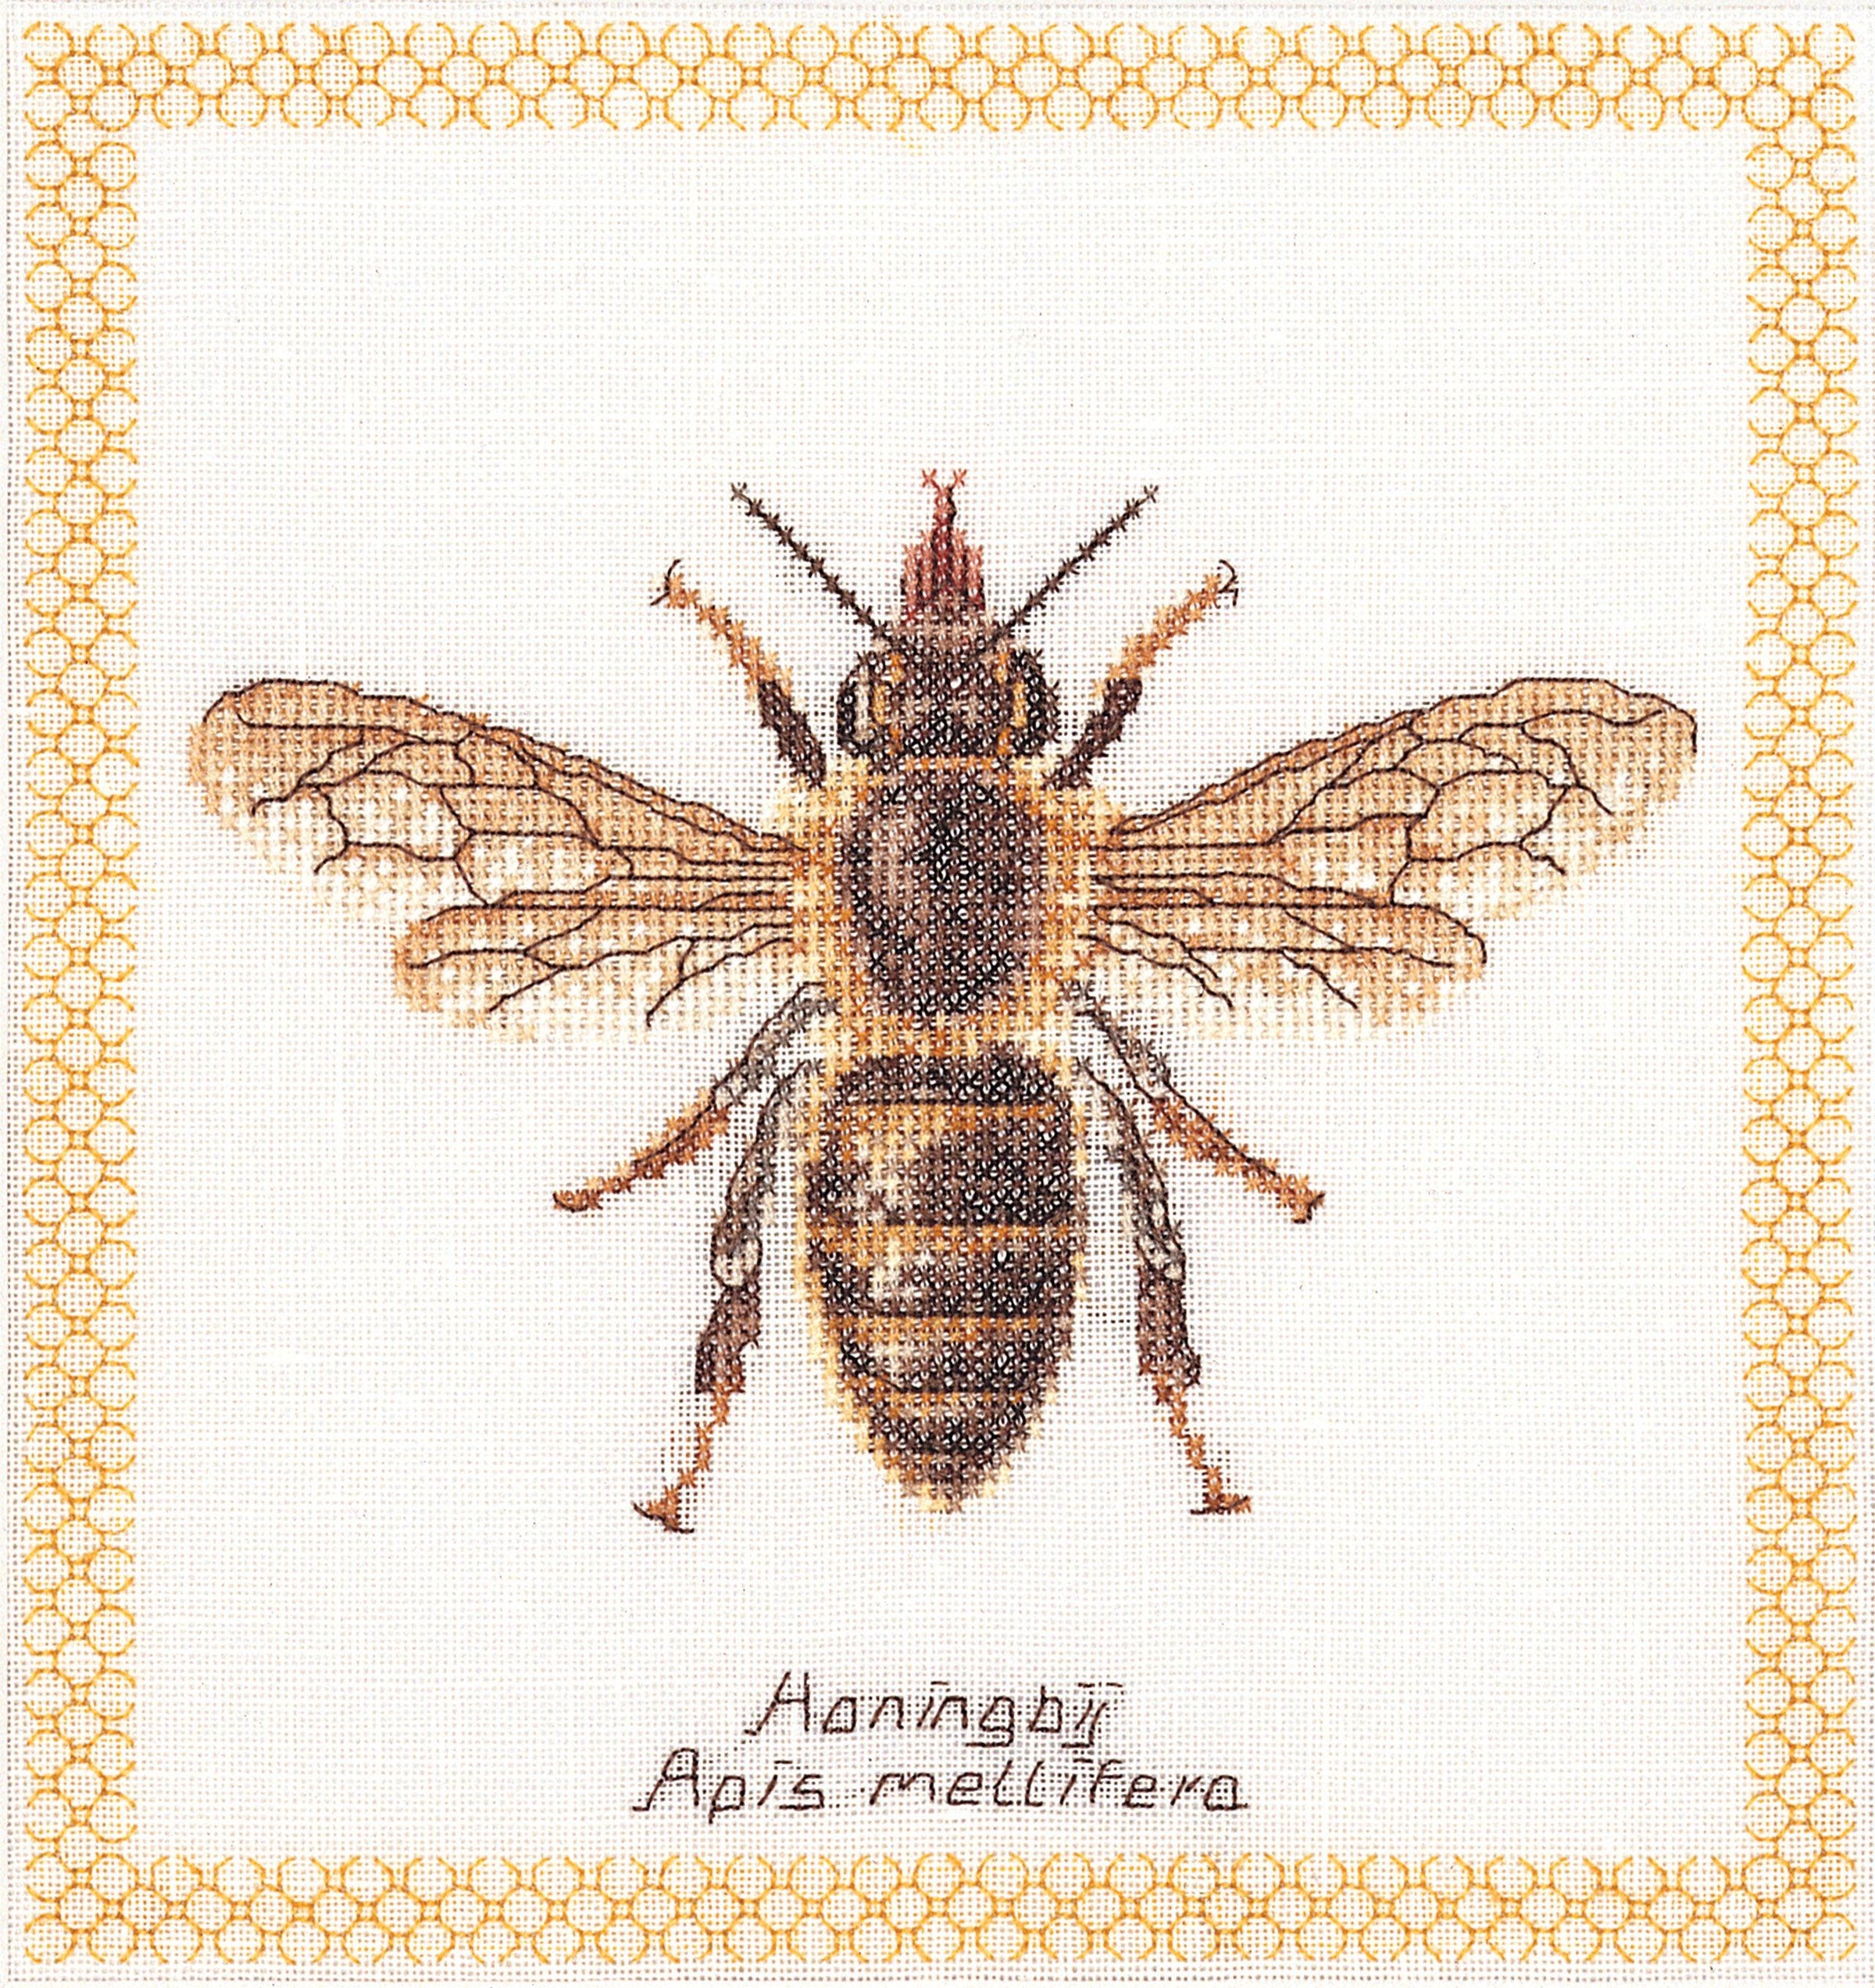 Thea Gouverneur - Counted Cross Stitch Kit - Honey Bee - Linen - 32 count - 3017 - Thea Gouverneur Since 1959